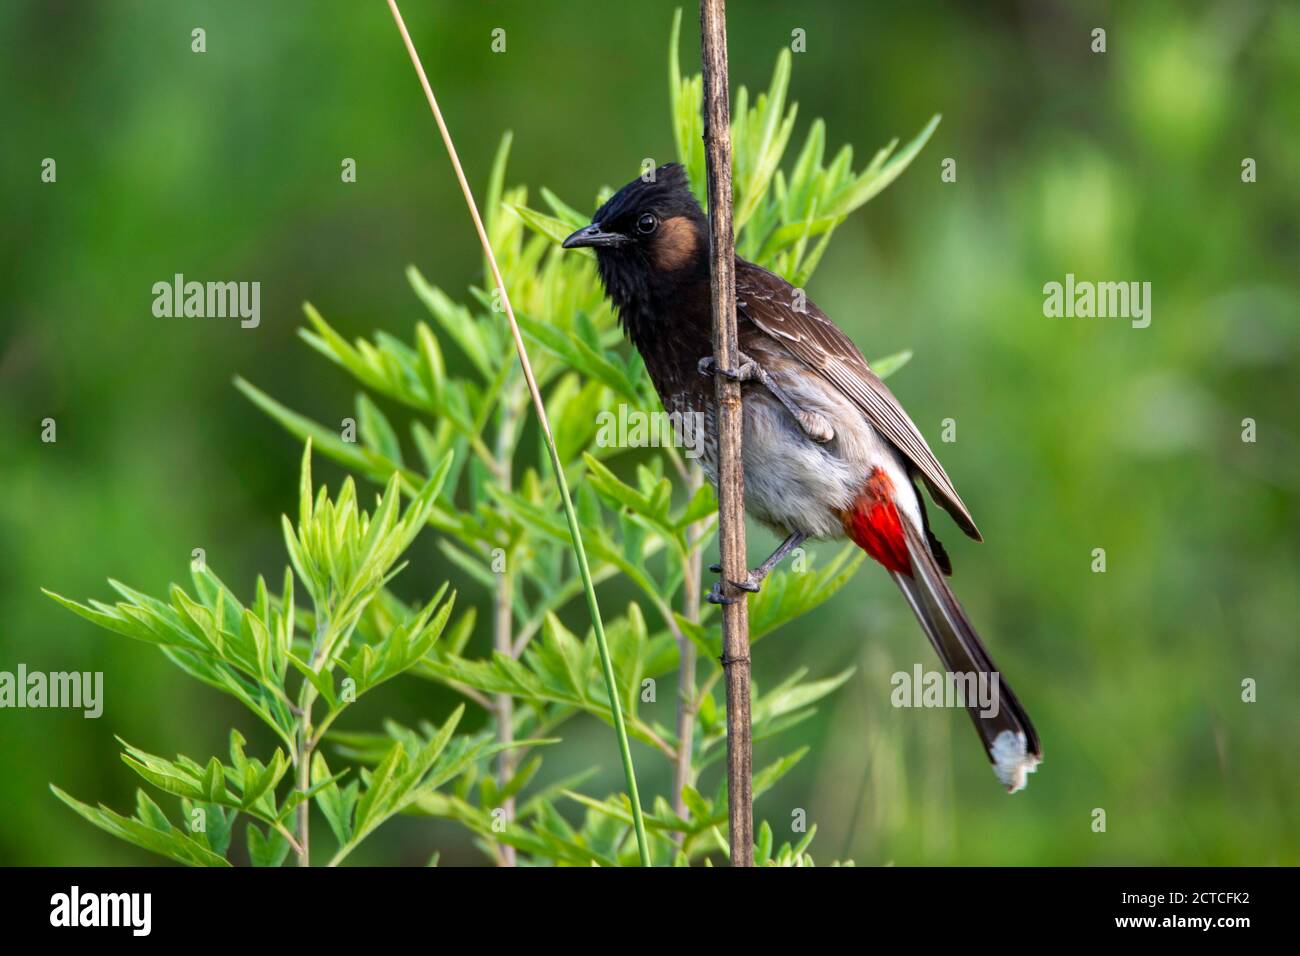 Red vented bulbul on grass stem Stock Photo